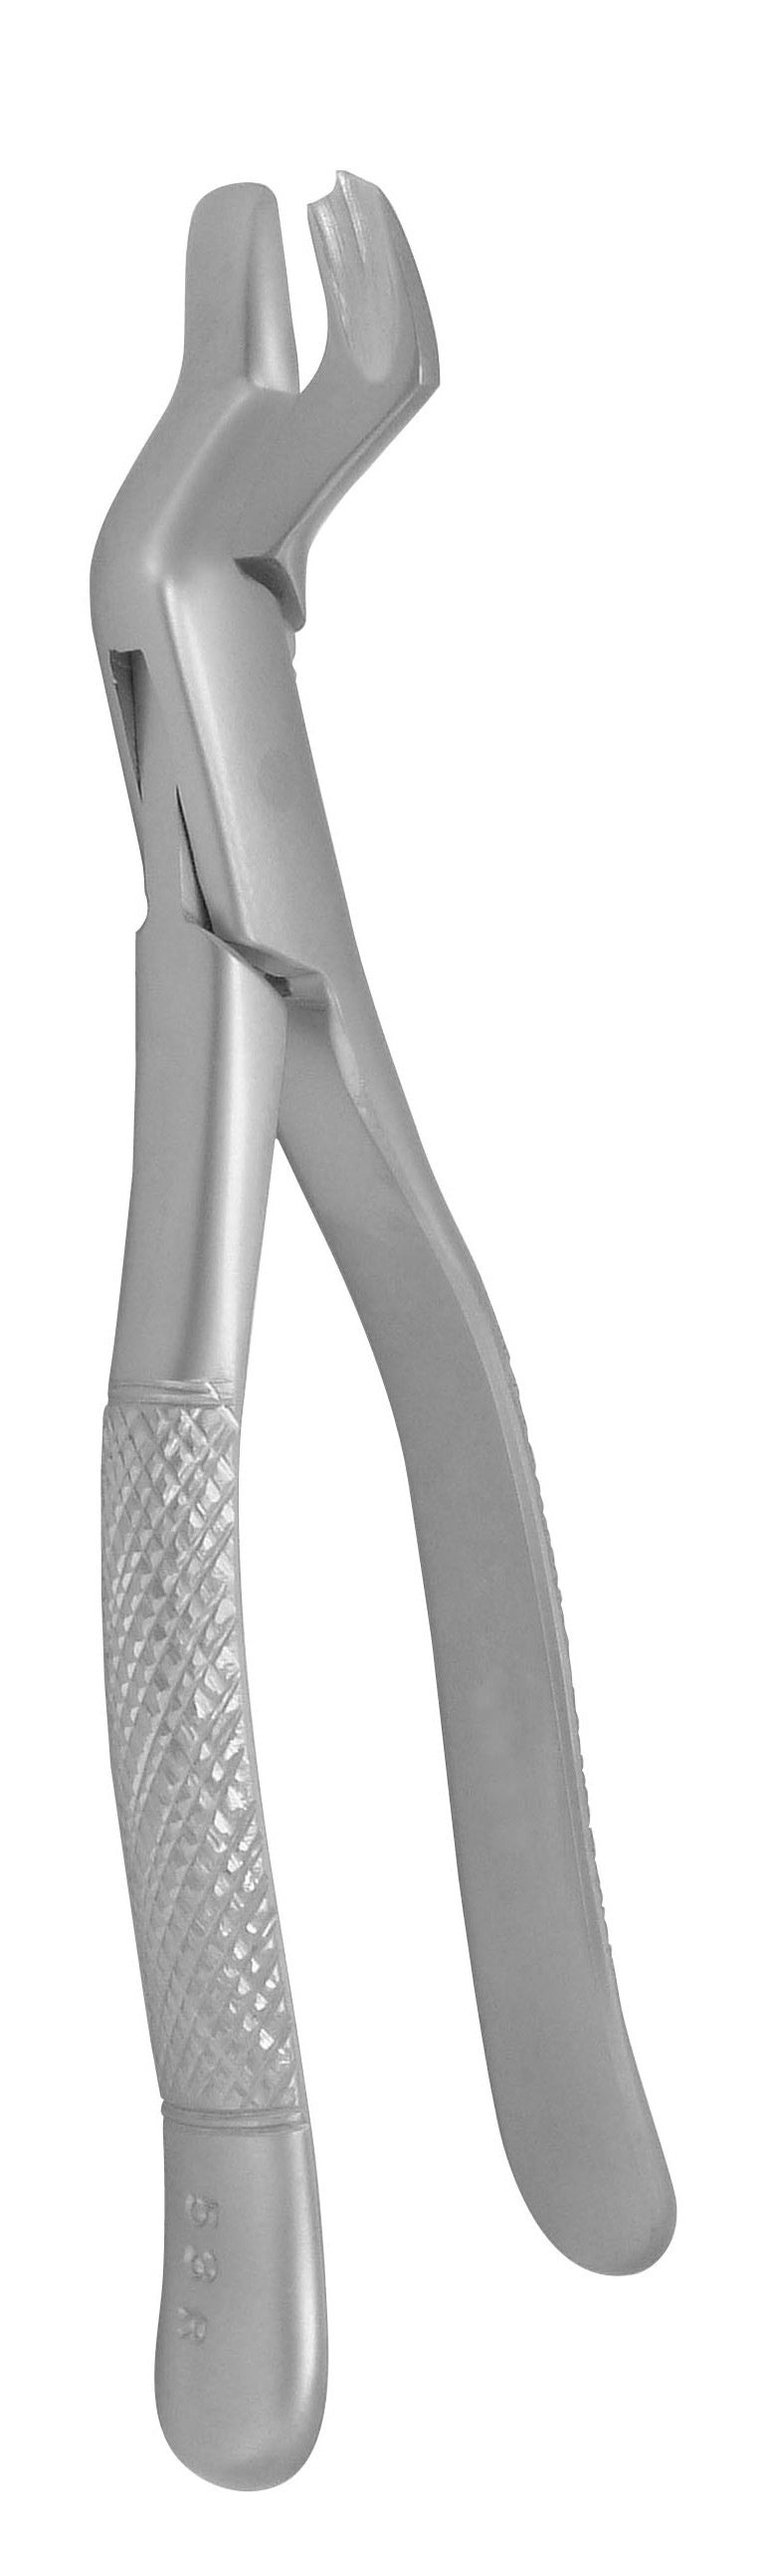 Extraction Forceps 53R